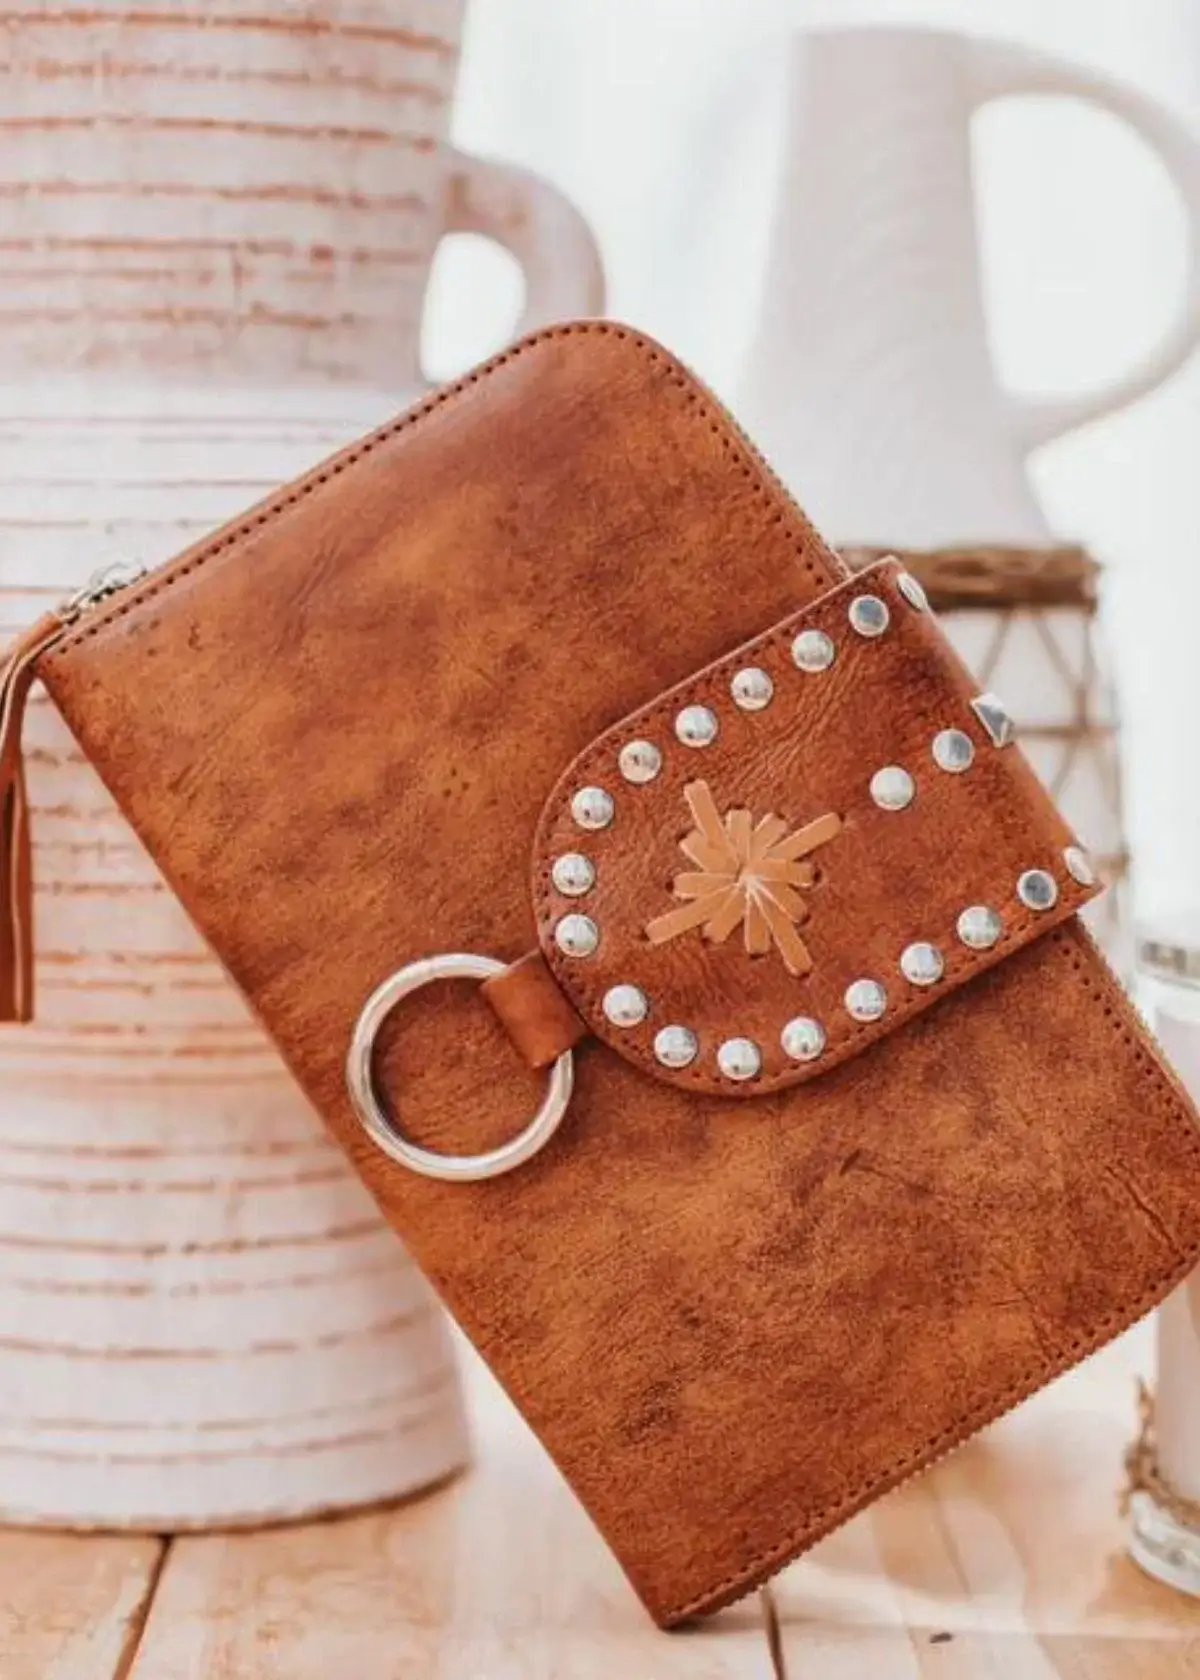 What makes a wallet "boho" style?